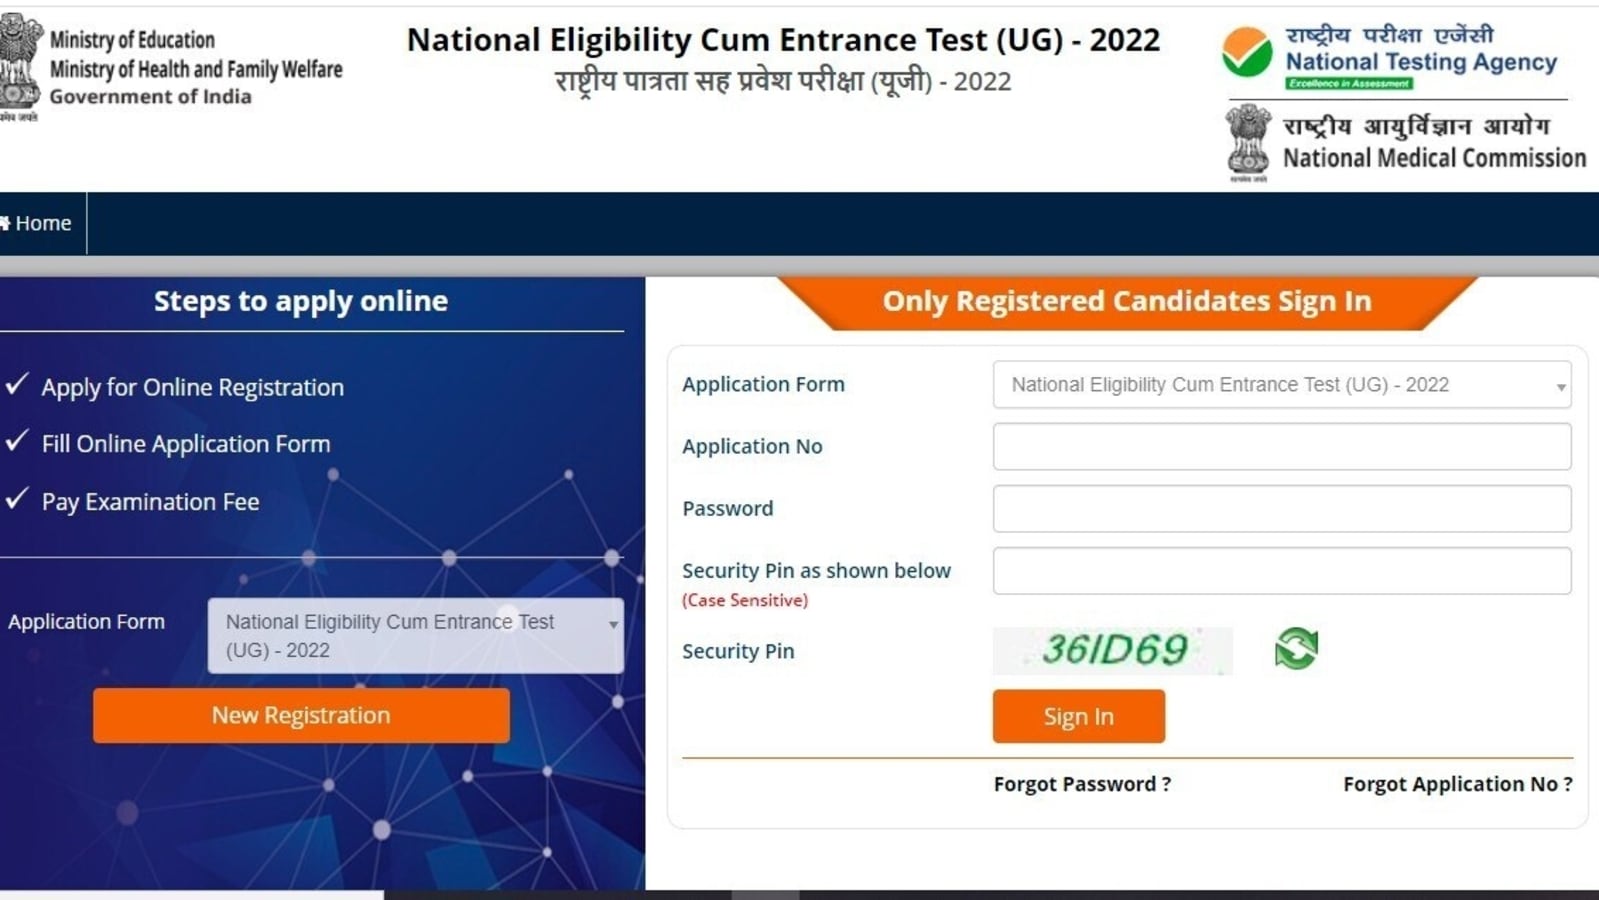 NEET 2022 Date LIVE: Exam on July 17, Direct link to apply on neet.nta.nic.in